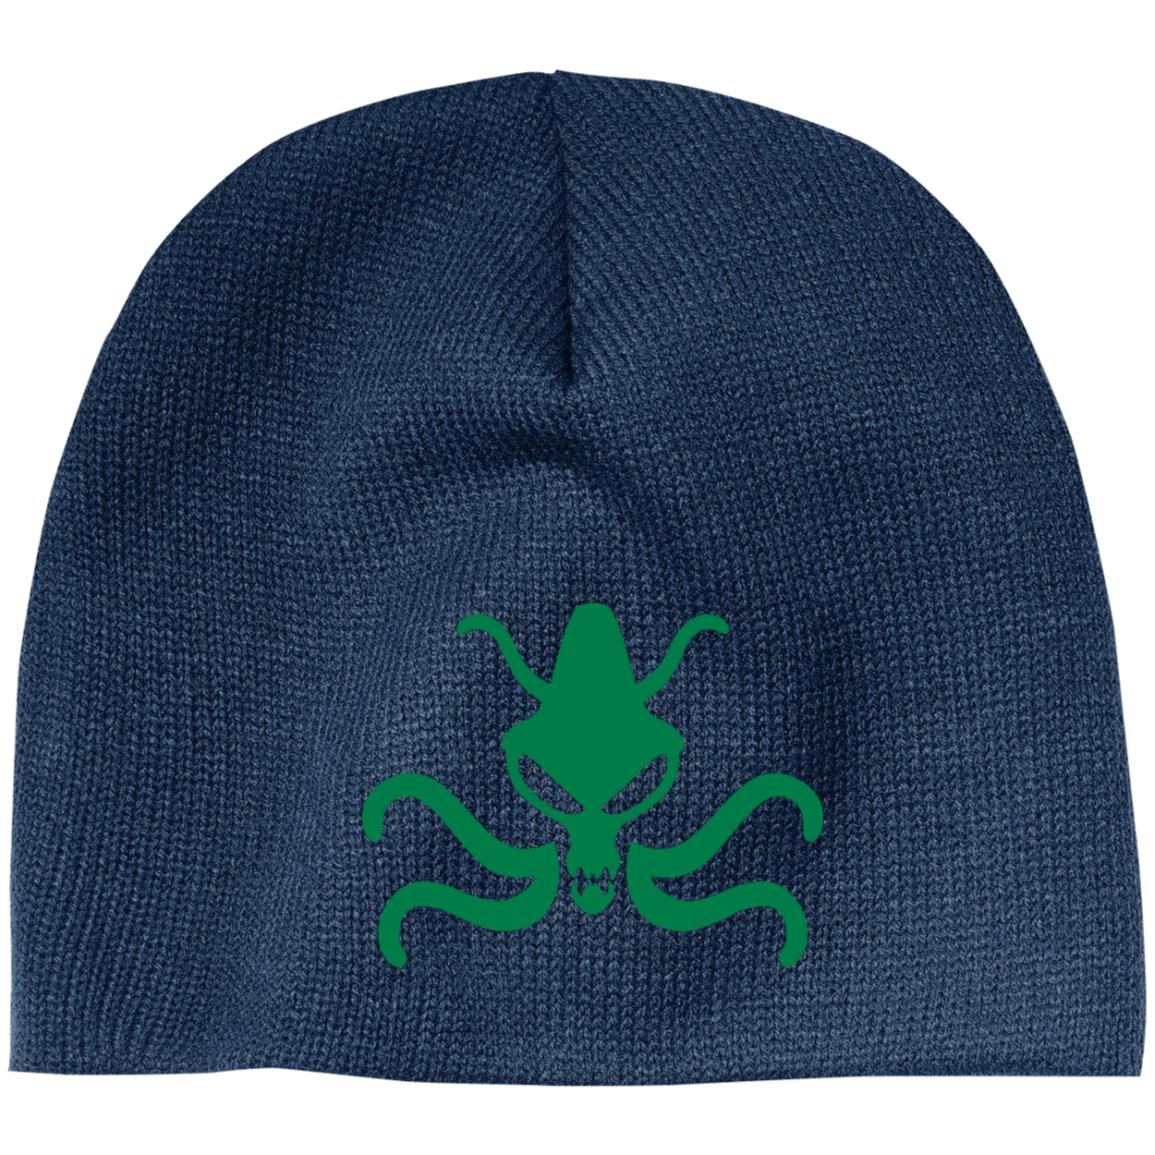 Weird Tales Squid Green Embroidered 100% Acrylic Beanie